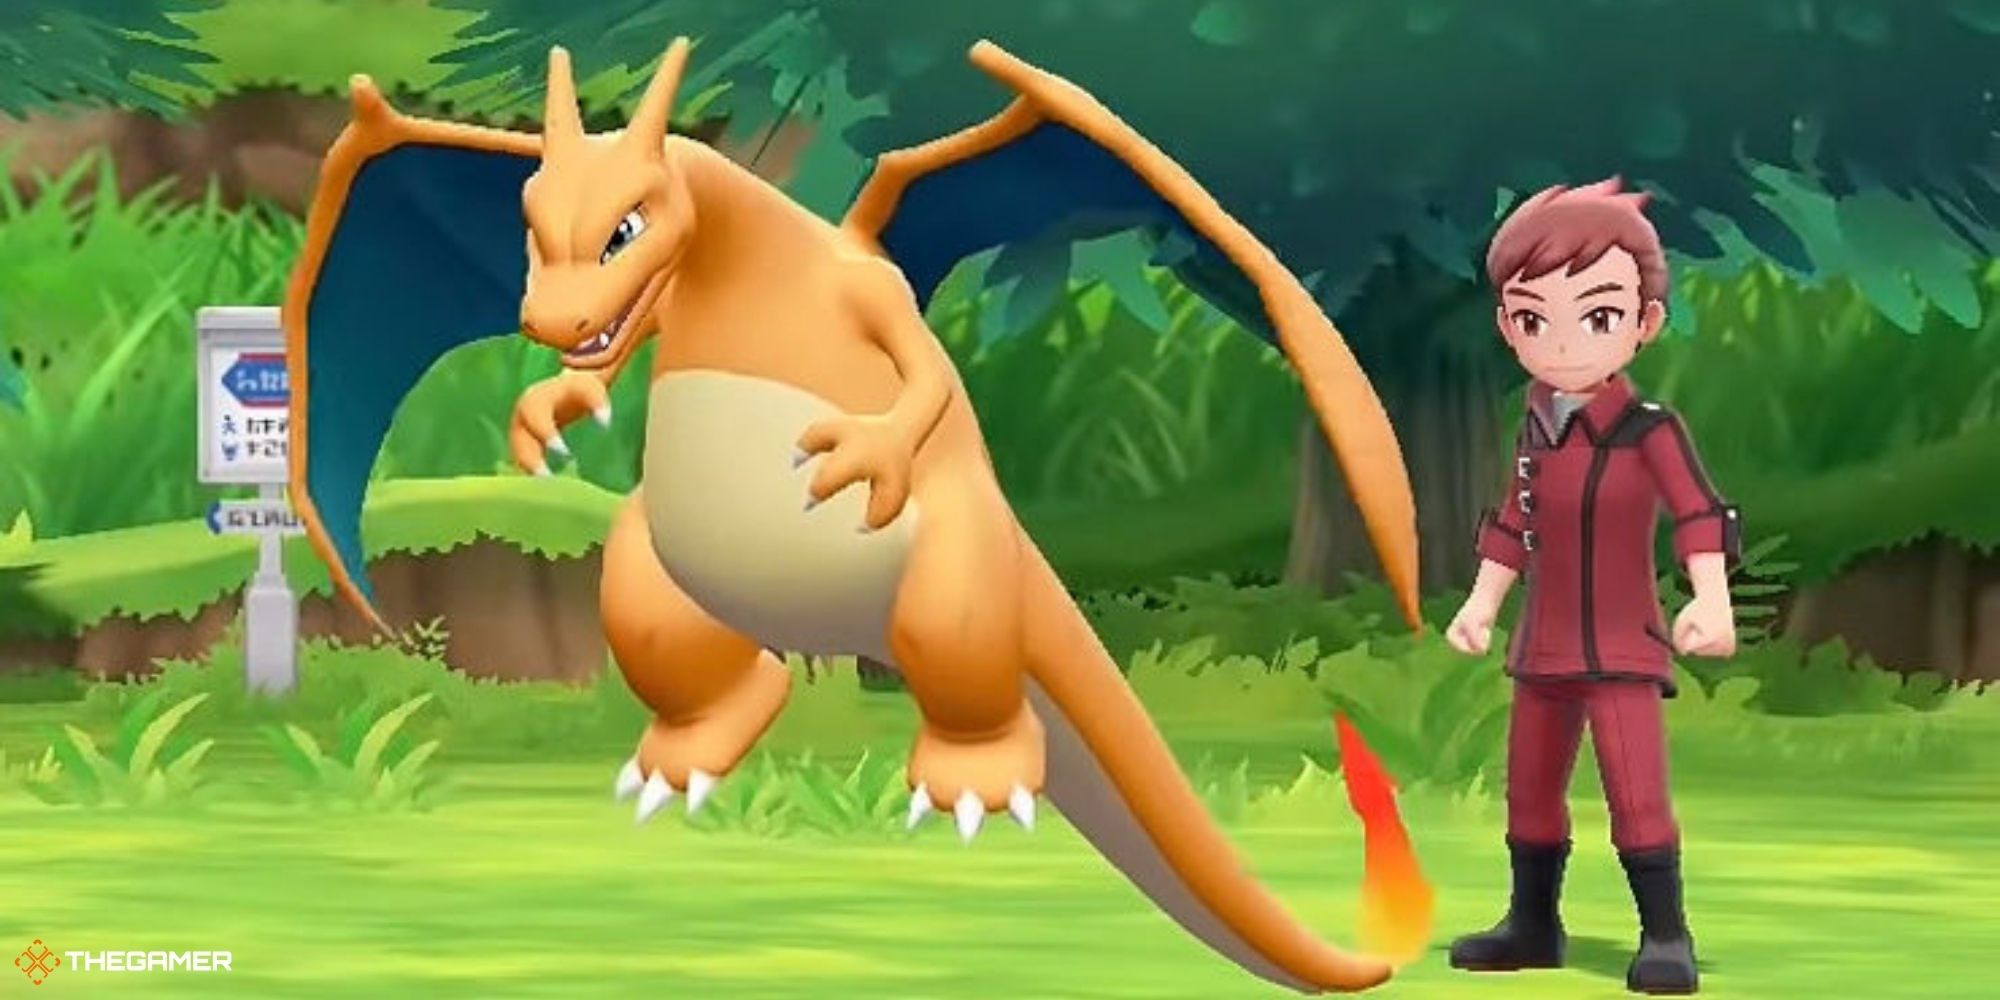 Let's Go Pikachu and Eevee - Charizard floating in grassy field